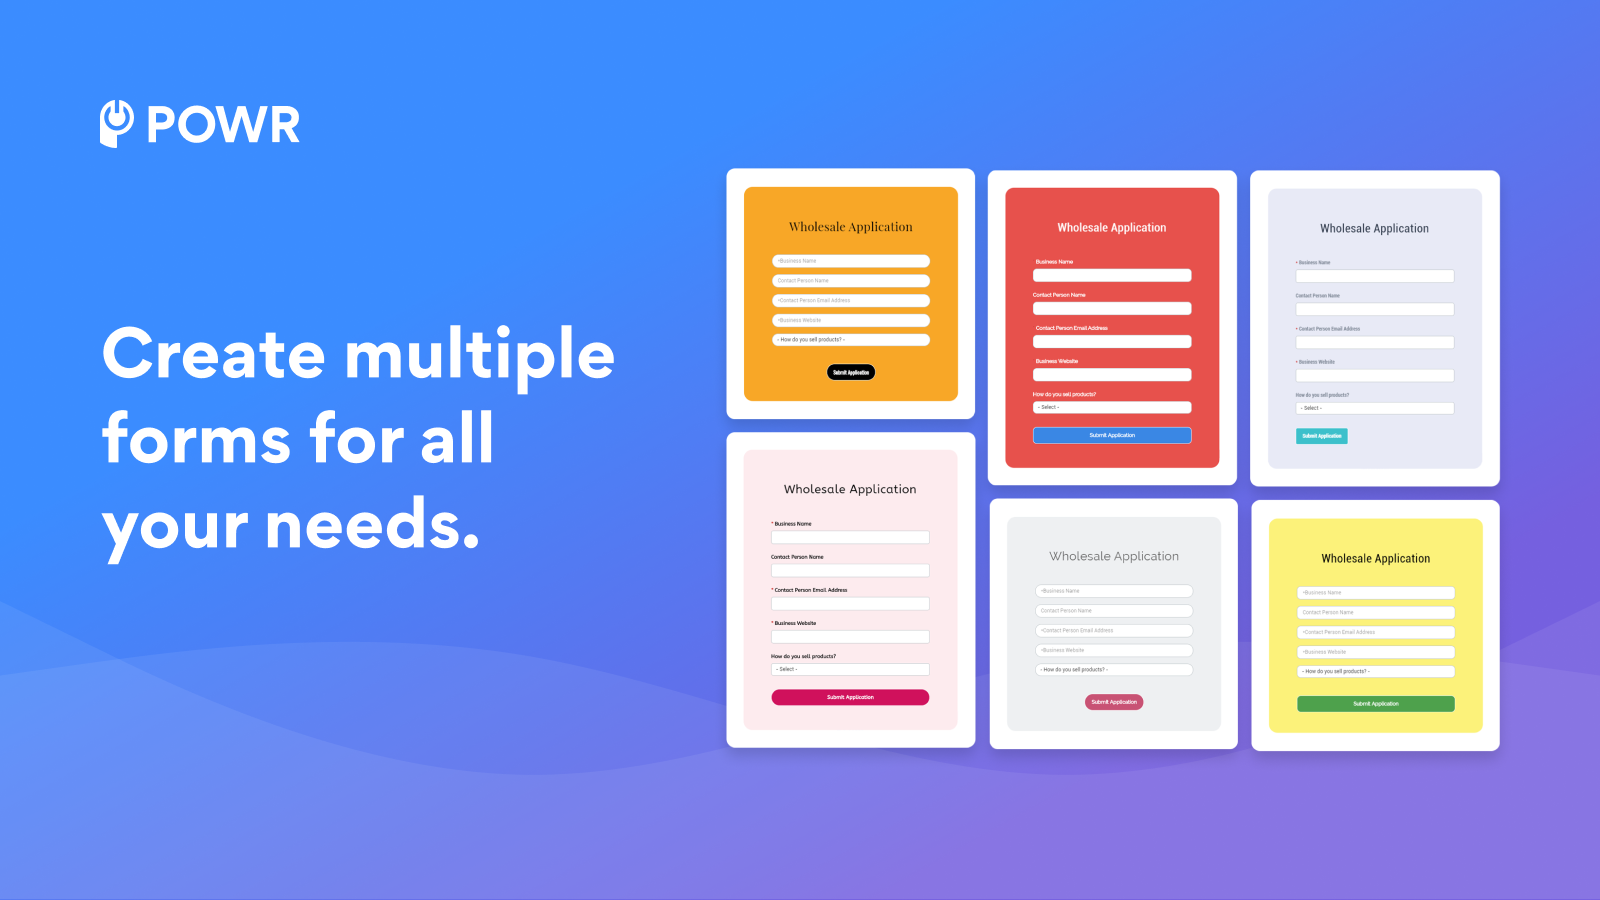 Create multiple forms for all your needs.